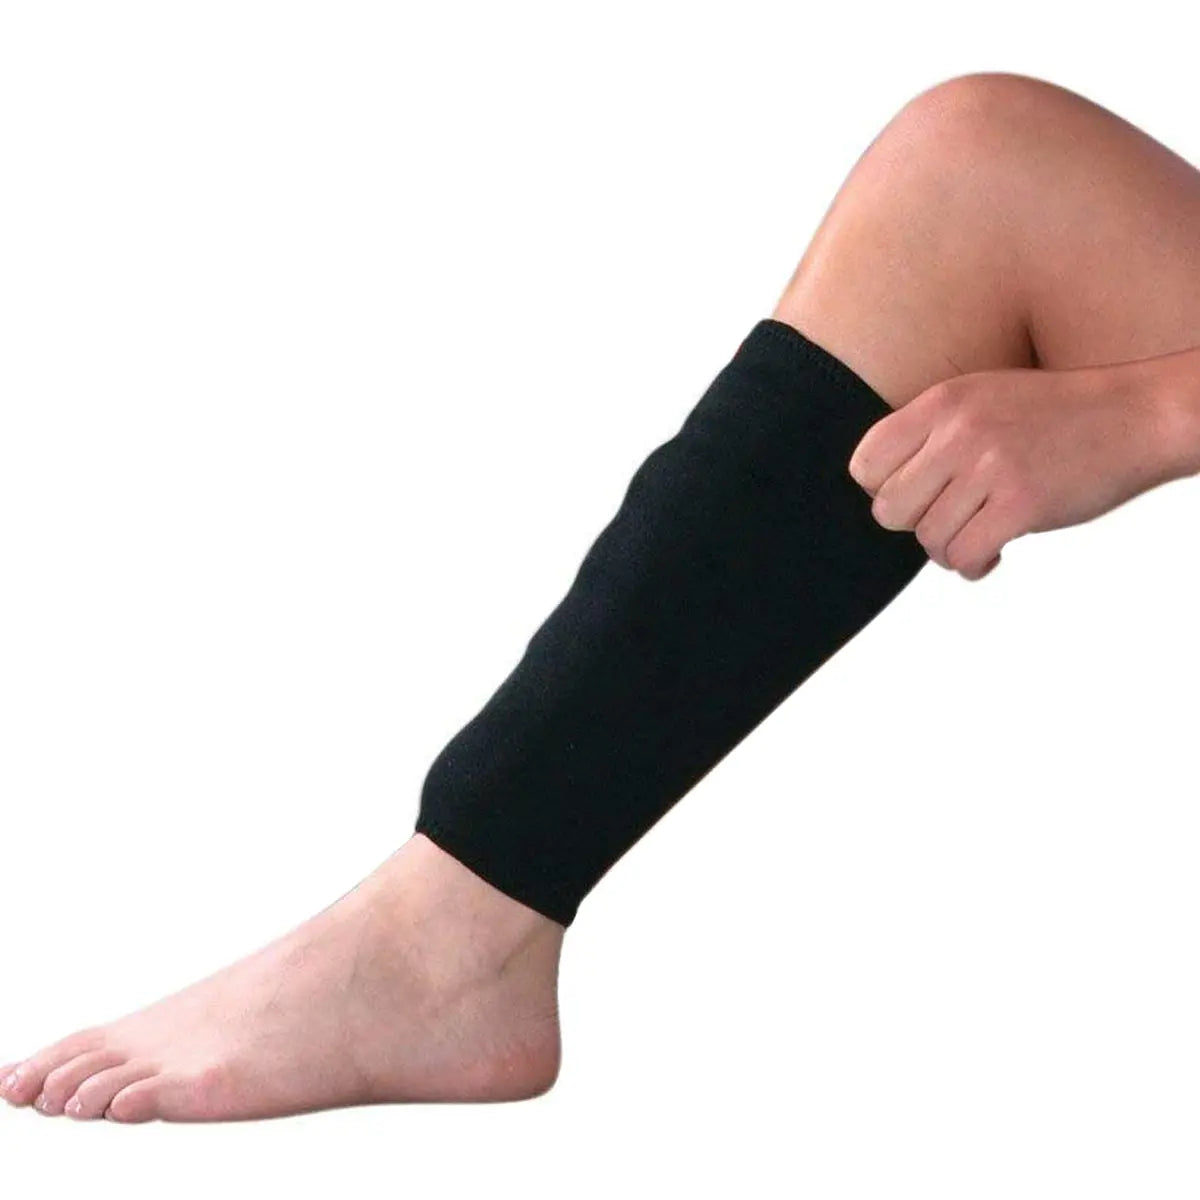 Polar Ice Compression Shin Wrap - Cold therapy helps reduce inflammation & pain Polar Ice